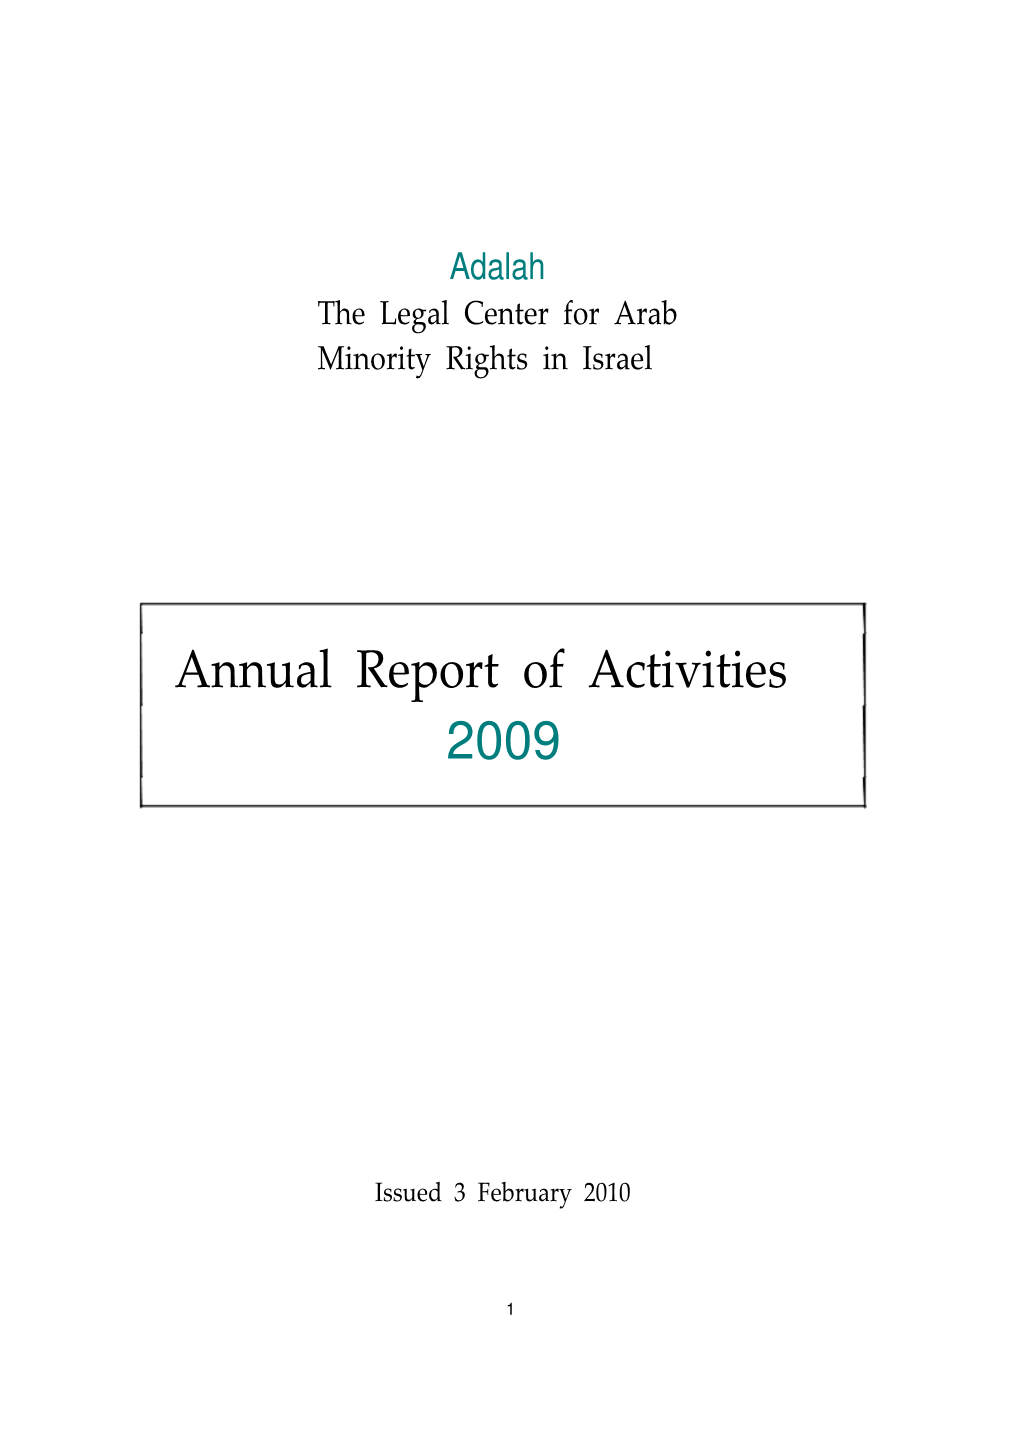 Annual Report of Activities 2009